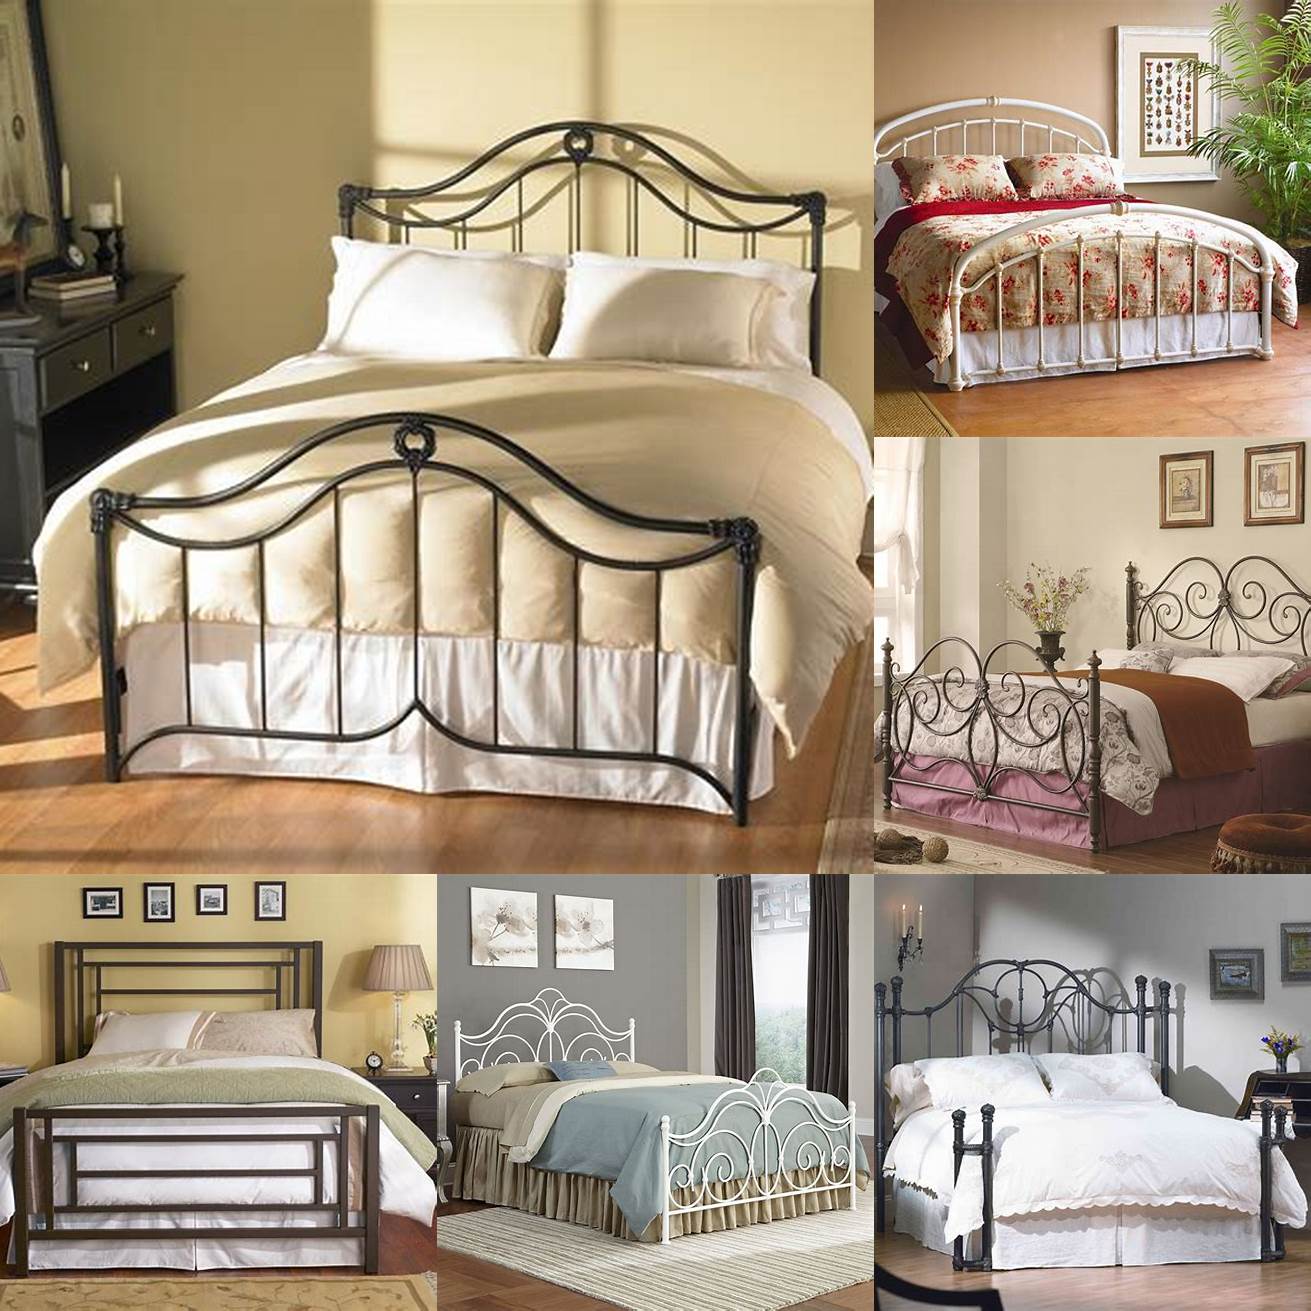 Price - Iron beds can be more expensive than other types of beds especially those with intricate designs